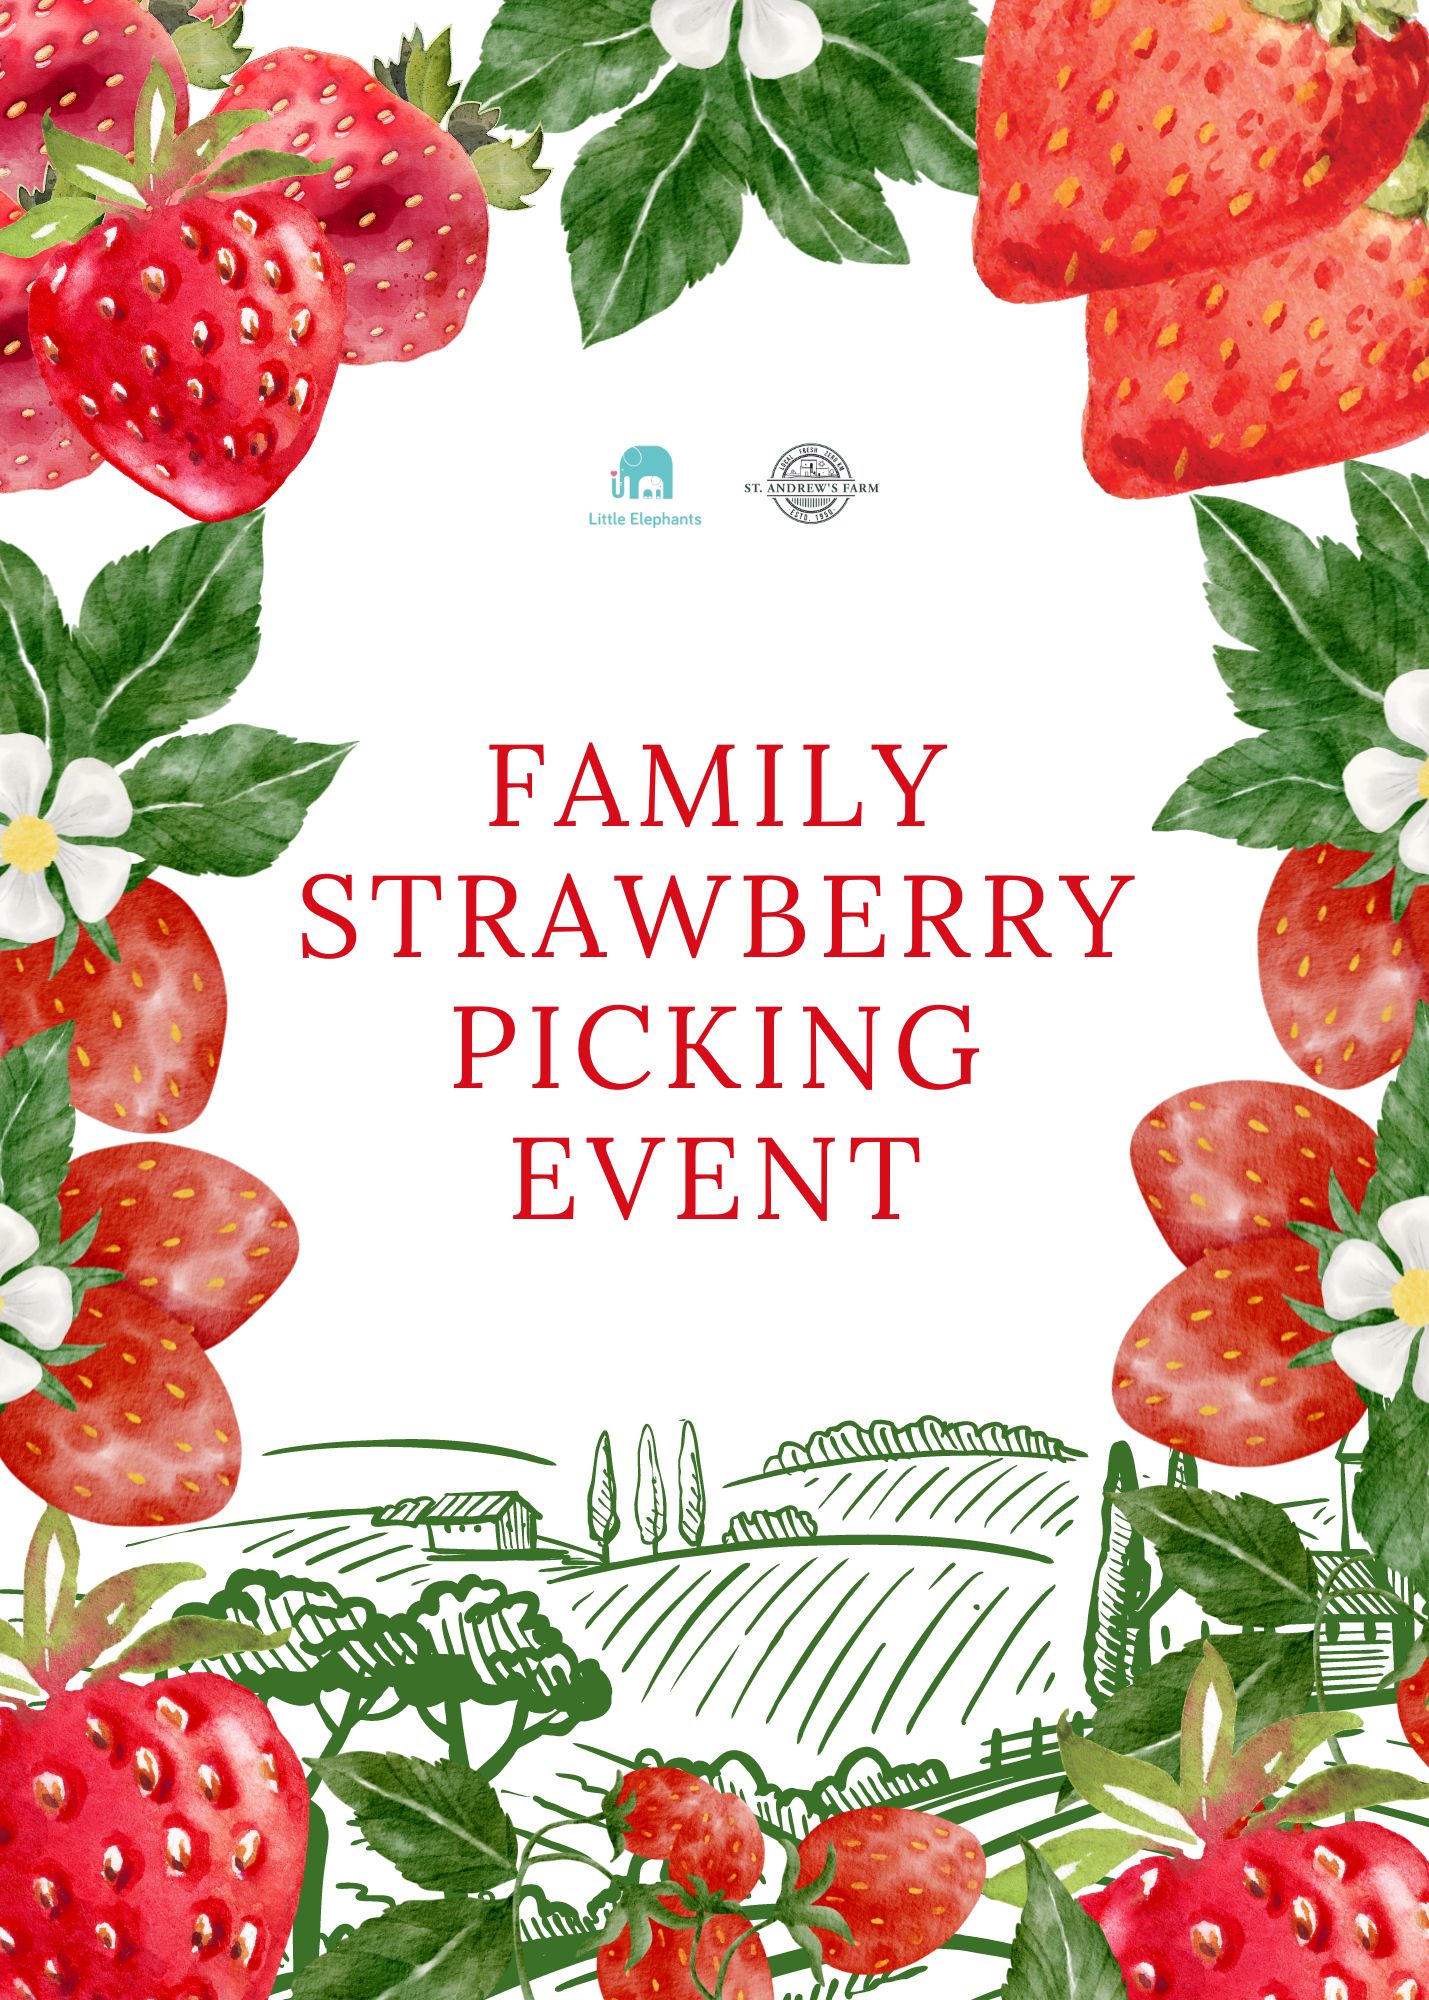 Strawberry Picking experience